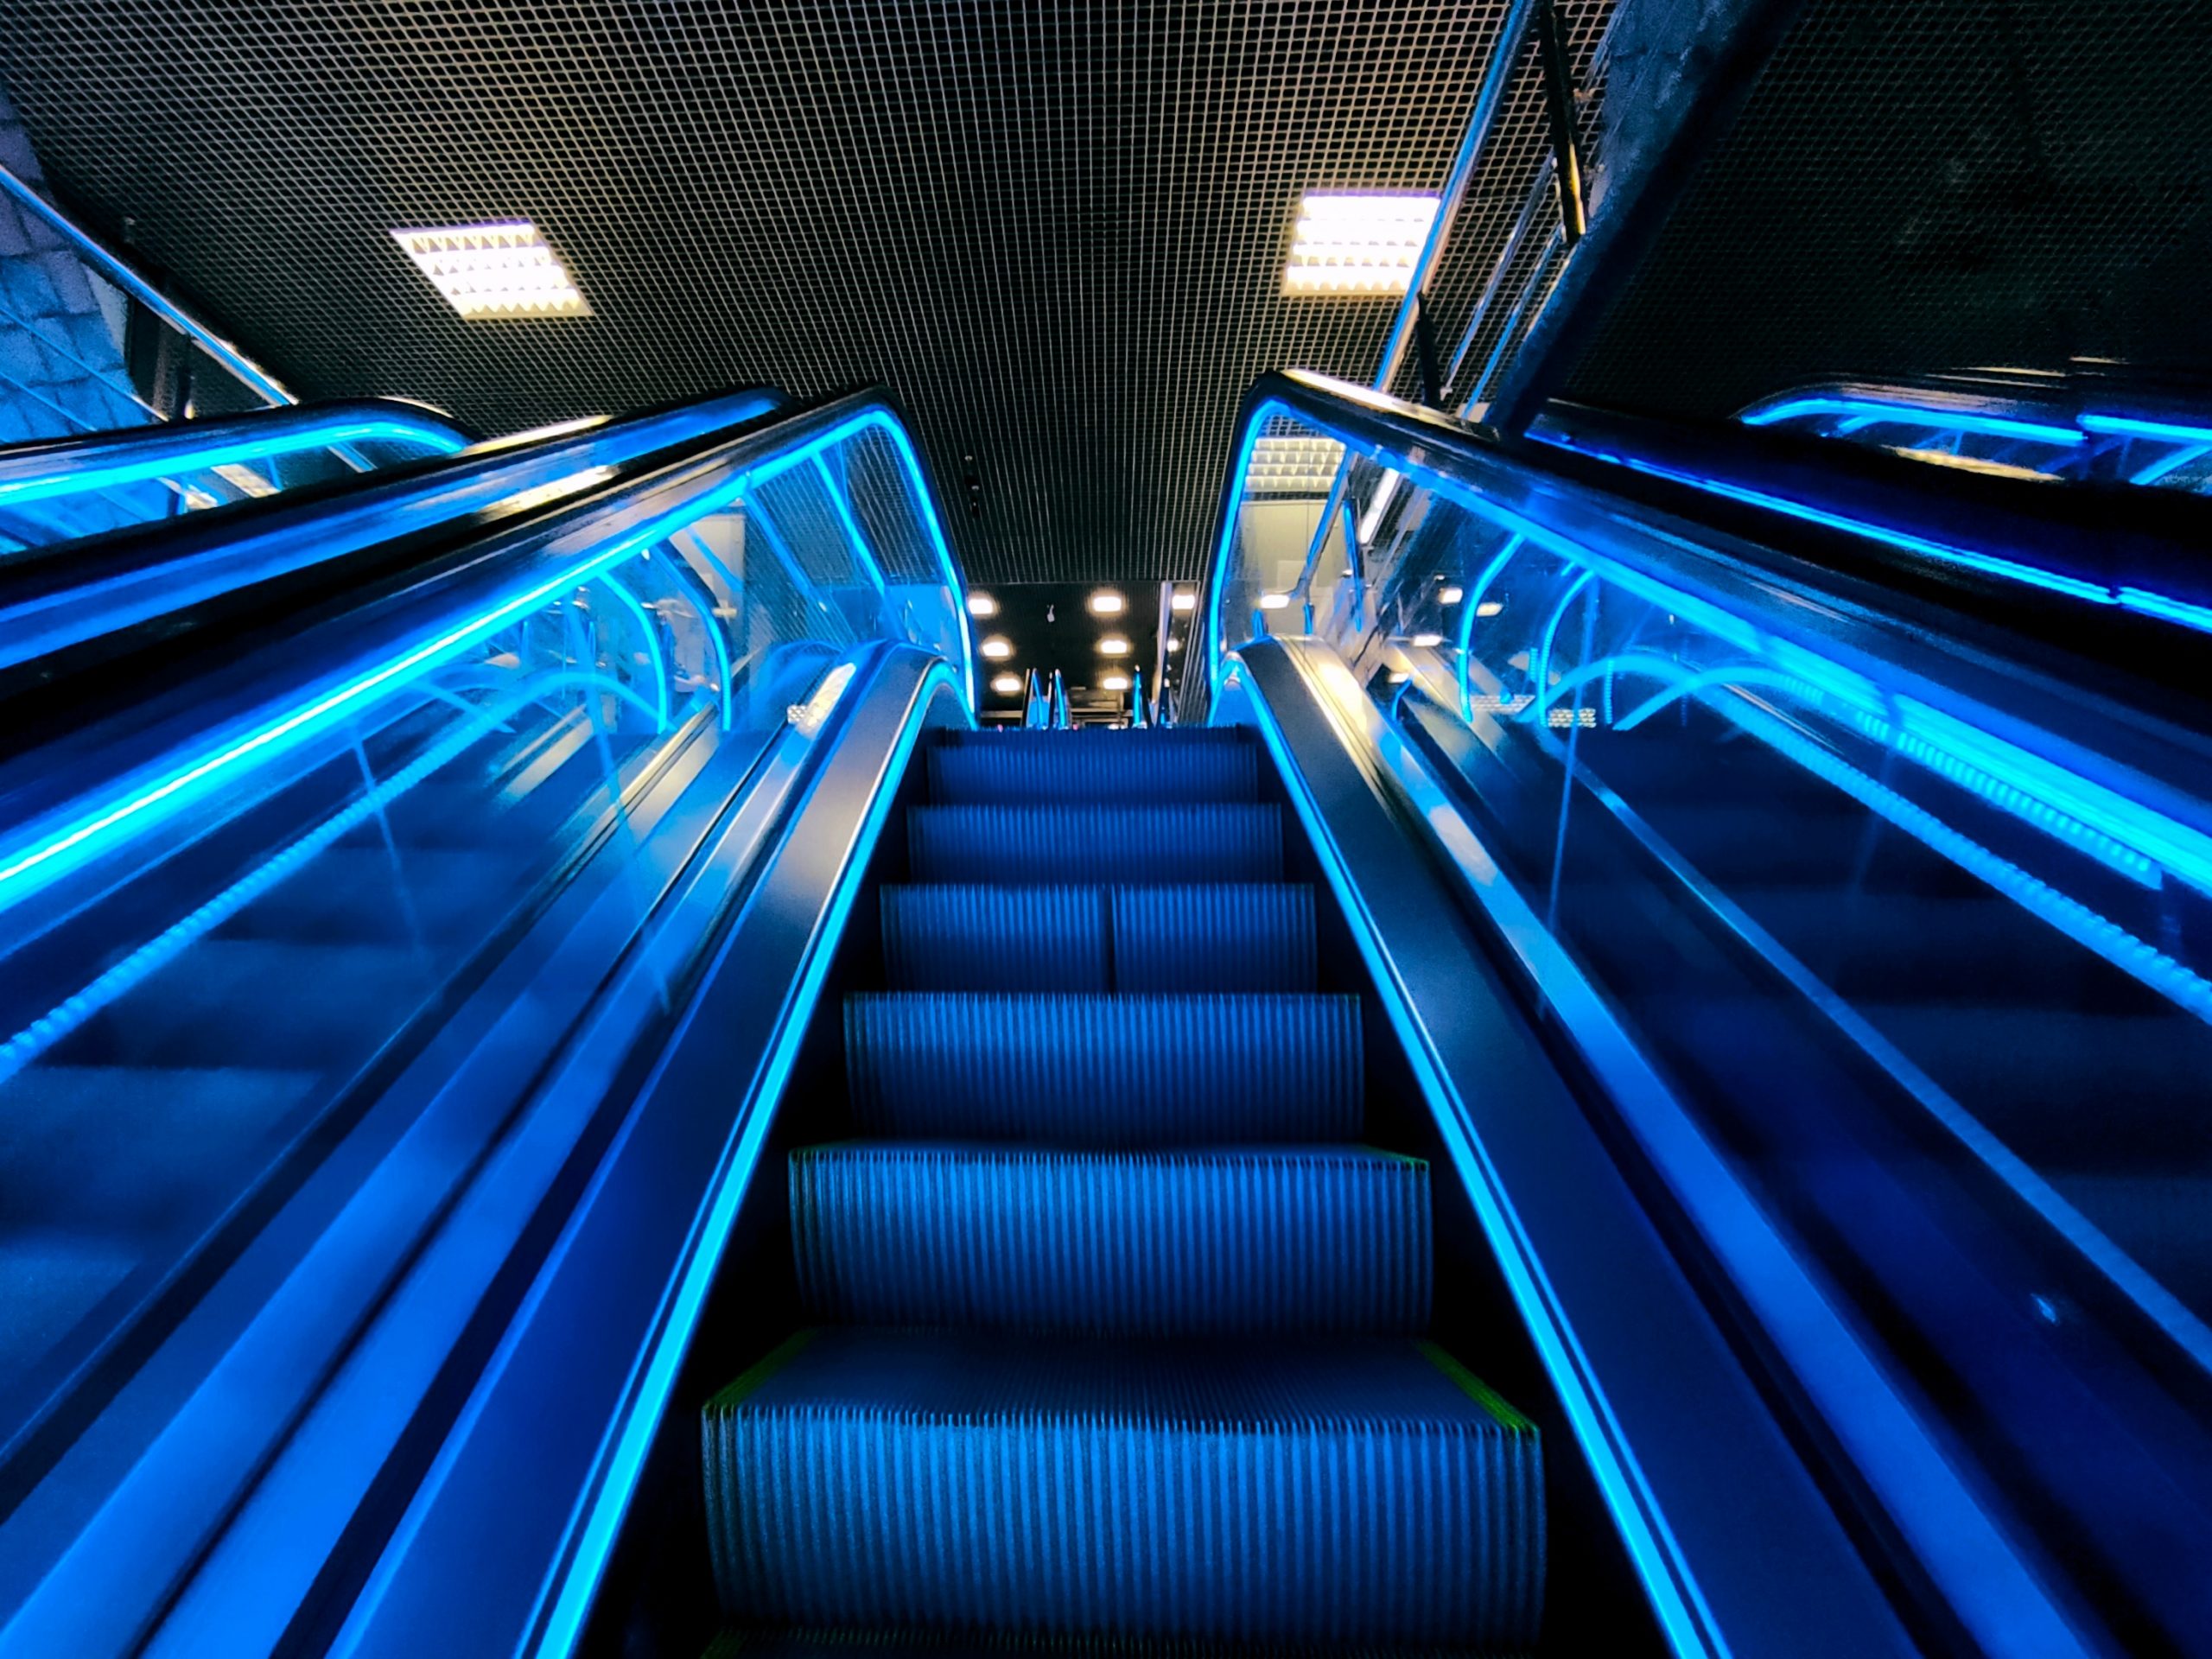 https://smpl.as/wp-content/uploads/2023/01/view-of-the-escalator-in-the-night-with-neon-blue-2022-11-01-04-45-34-utc-scaled.jpg